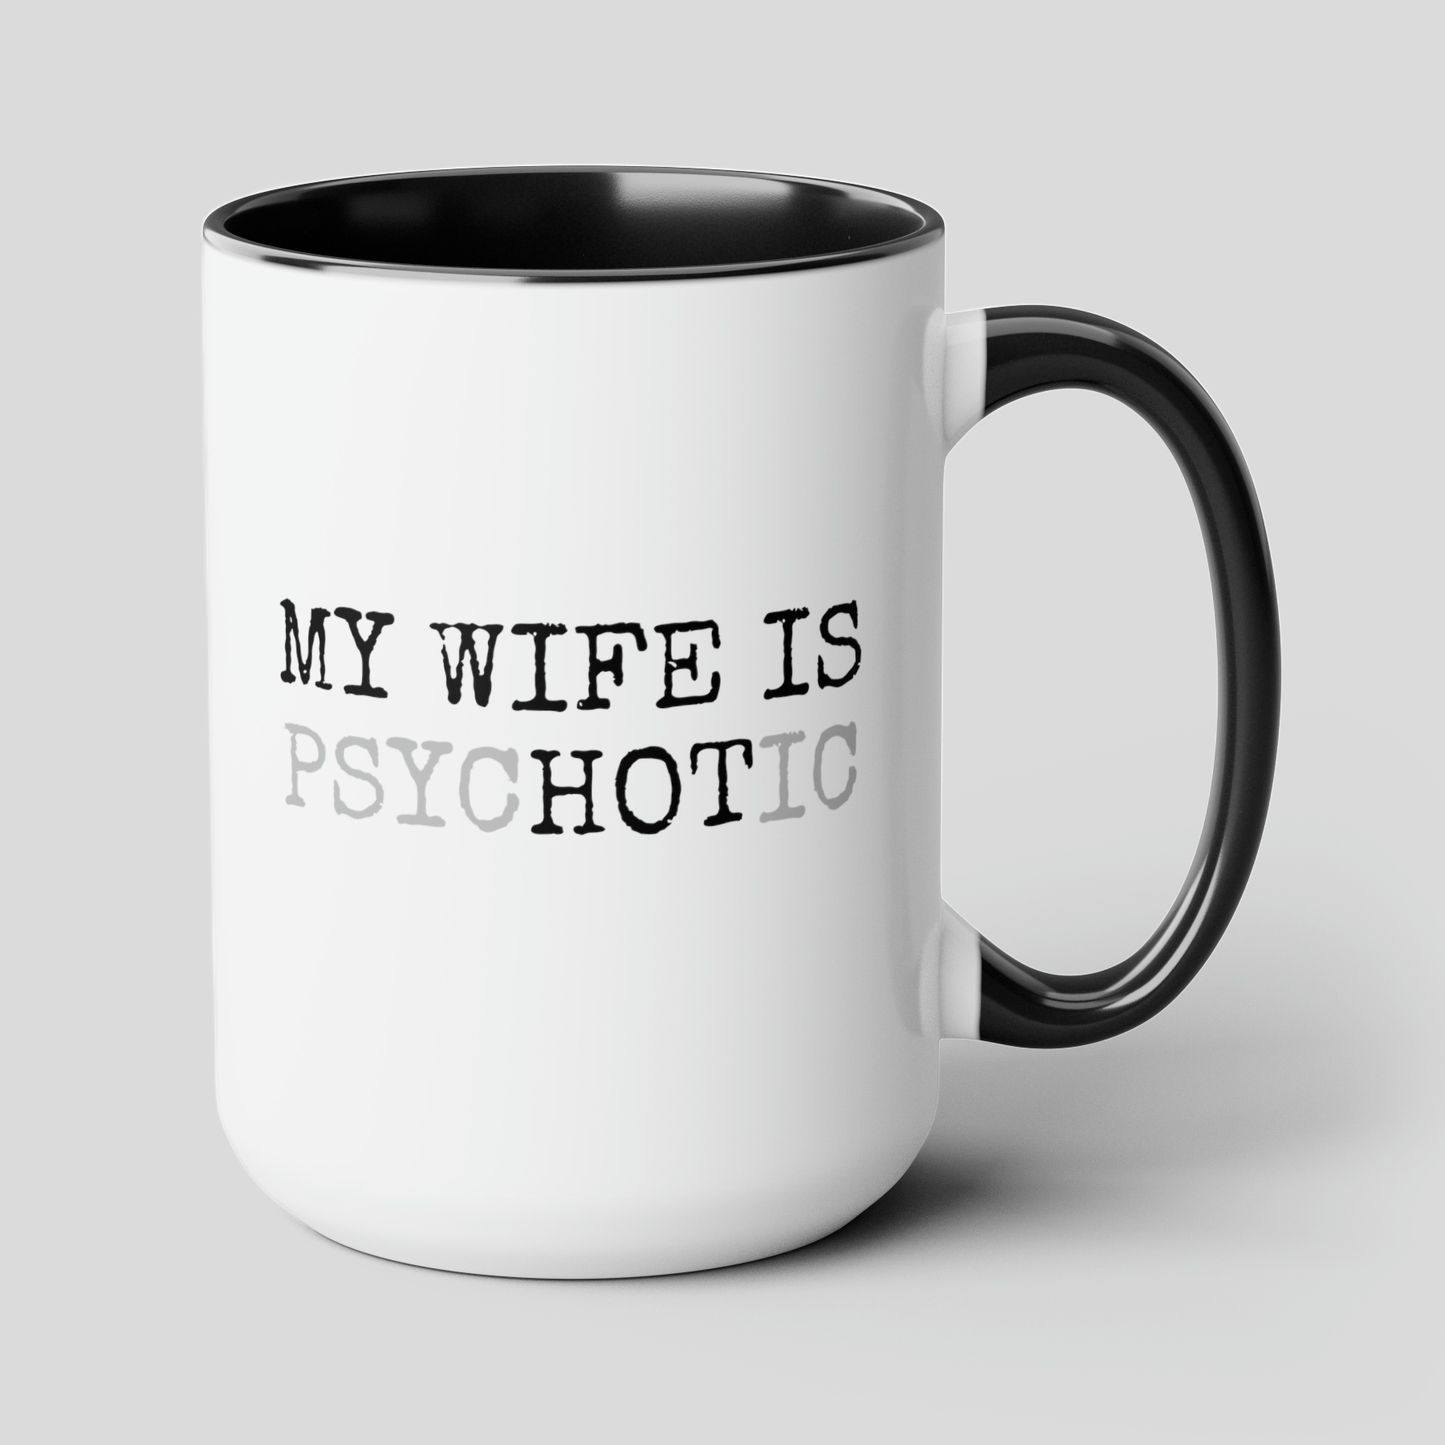 My Wife Is Hot Psychotic 15oz white with black accent funny large coffee mug gift for him boyfriend husband rude curse valentines anniversary waveywares wavey wares wavywares wavy wares cover